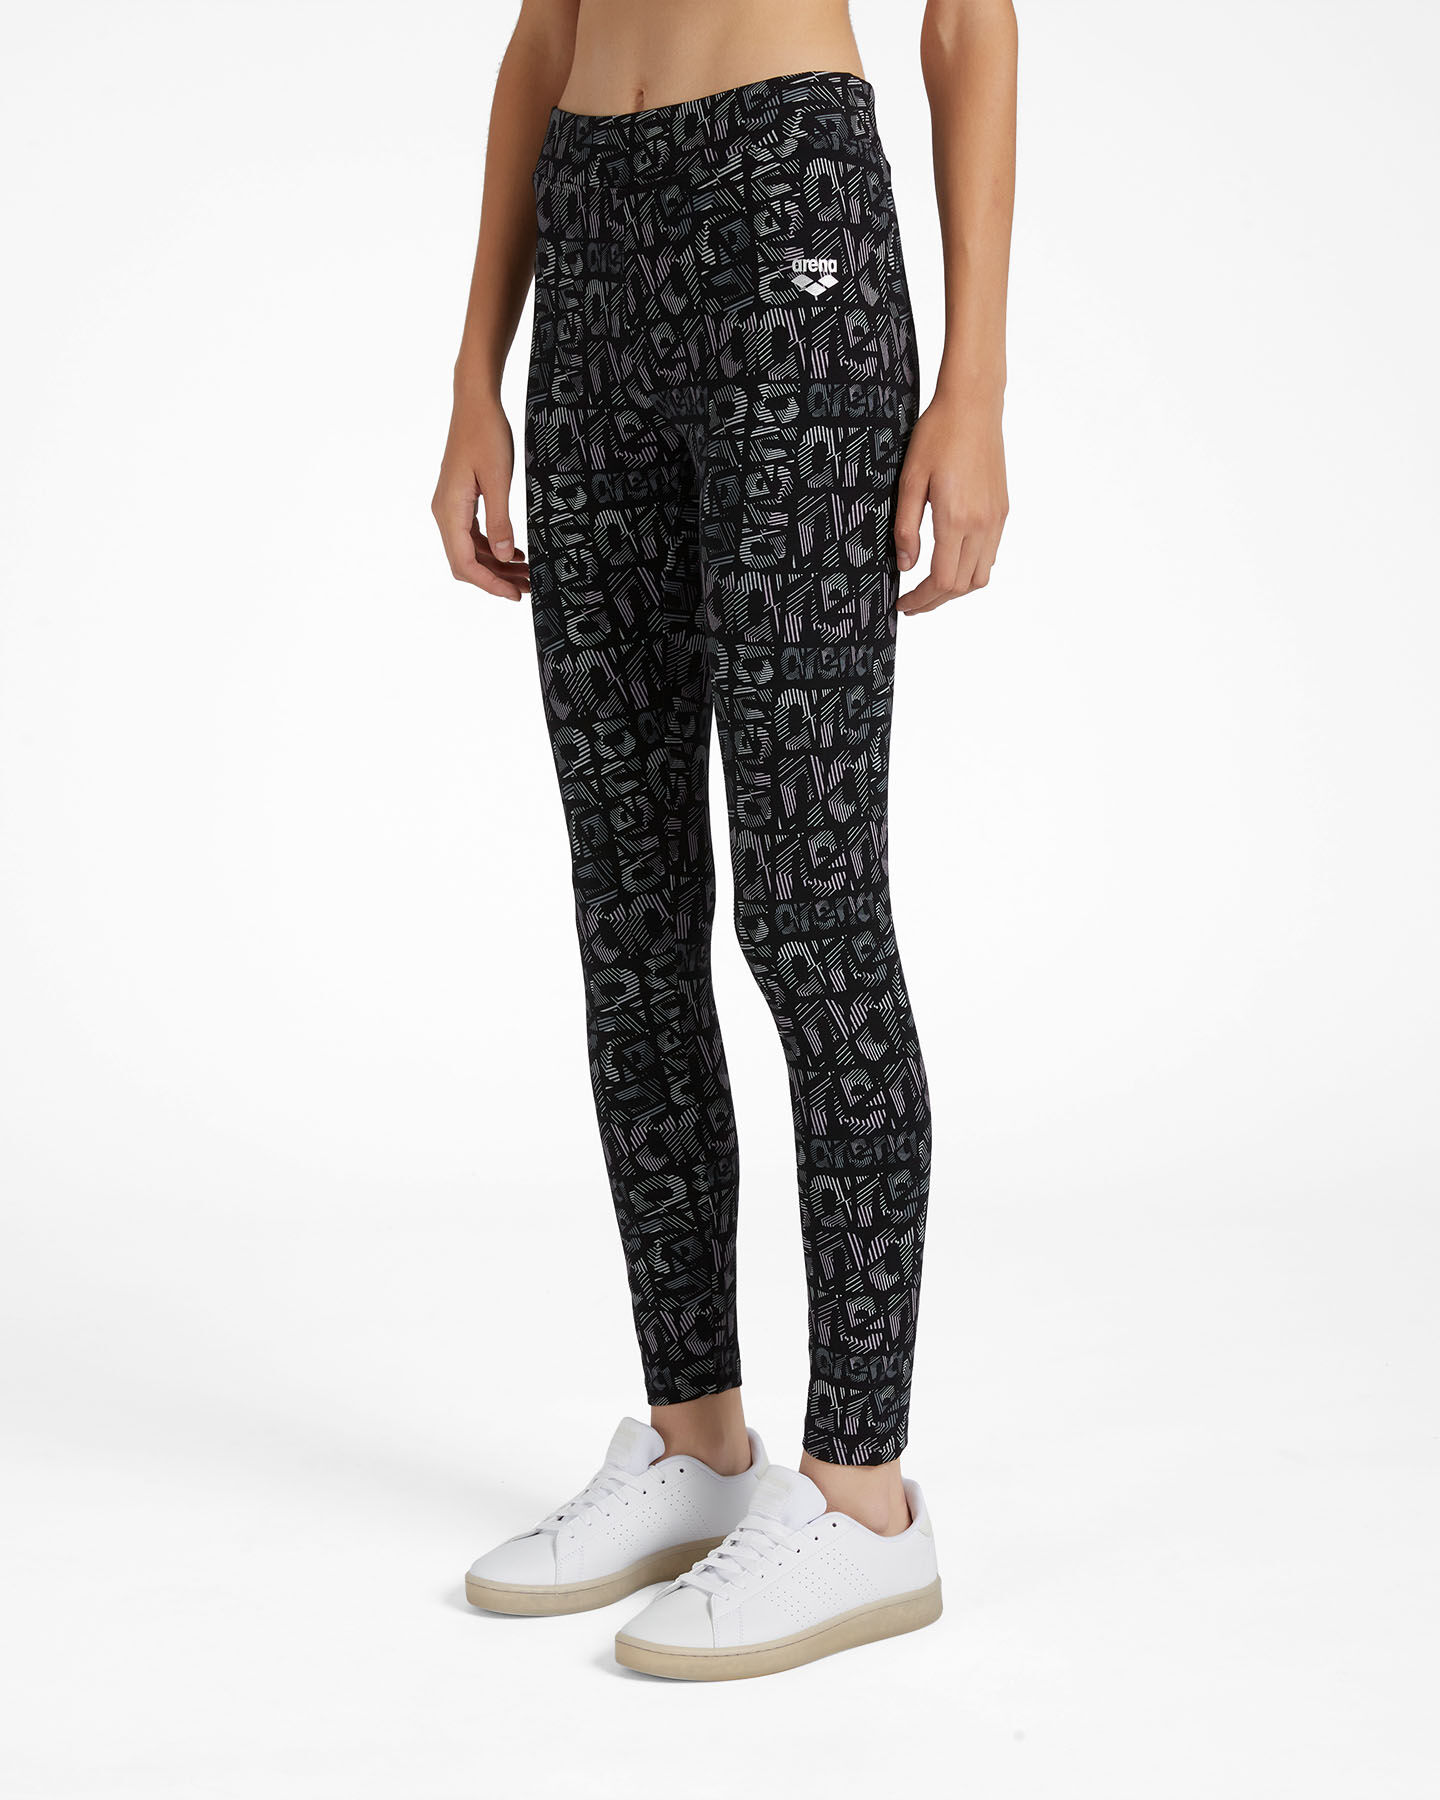  Leggings ARENA BASIC ATHLETICS LETTERS JSTRETCH W S4094338|AOP/050|S scatto 2